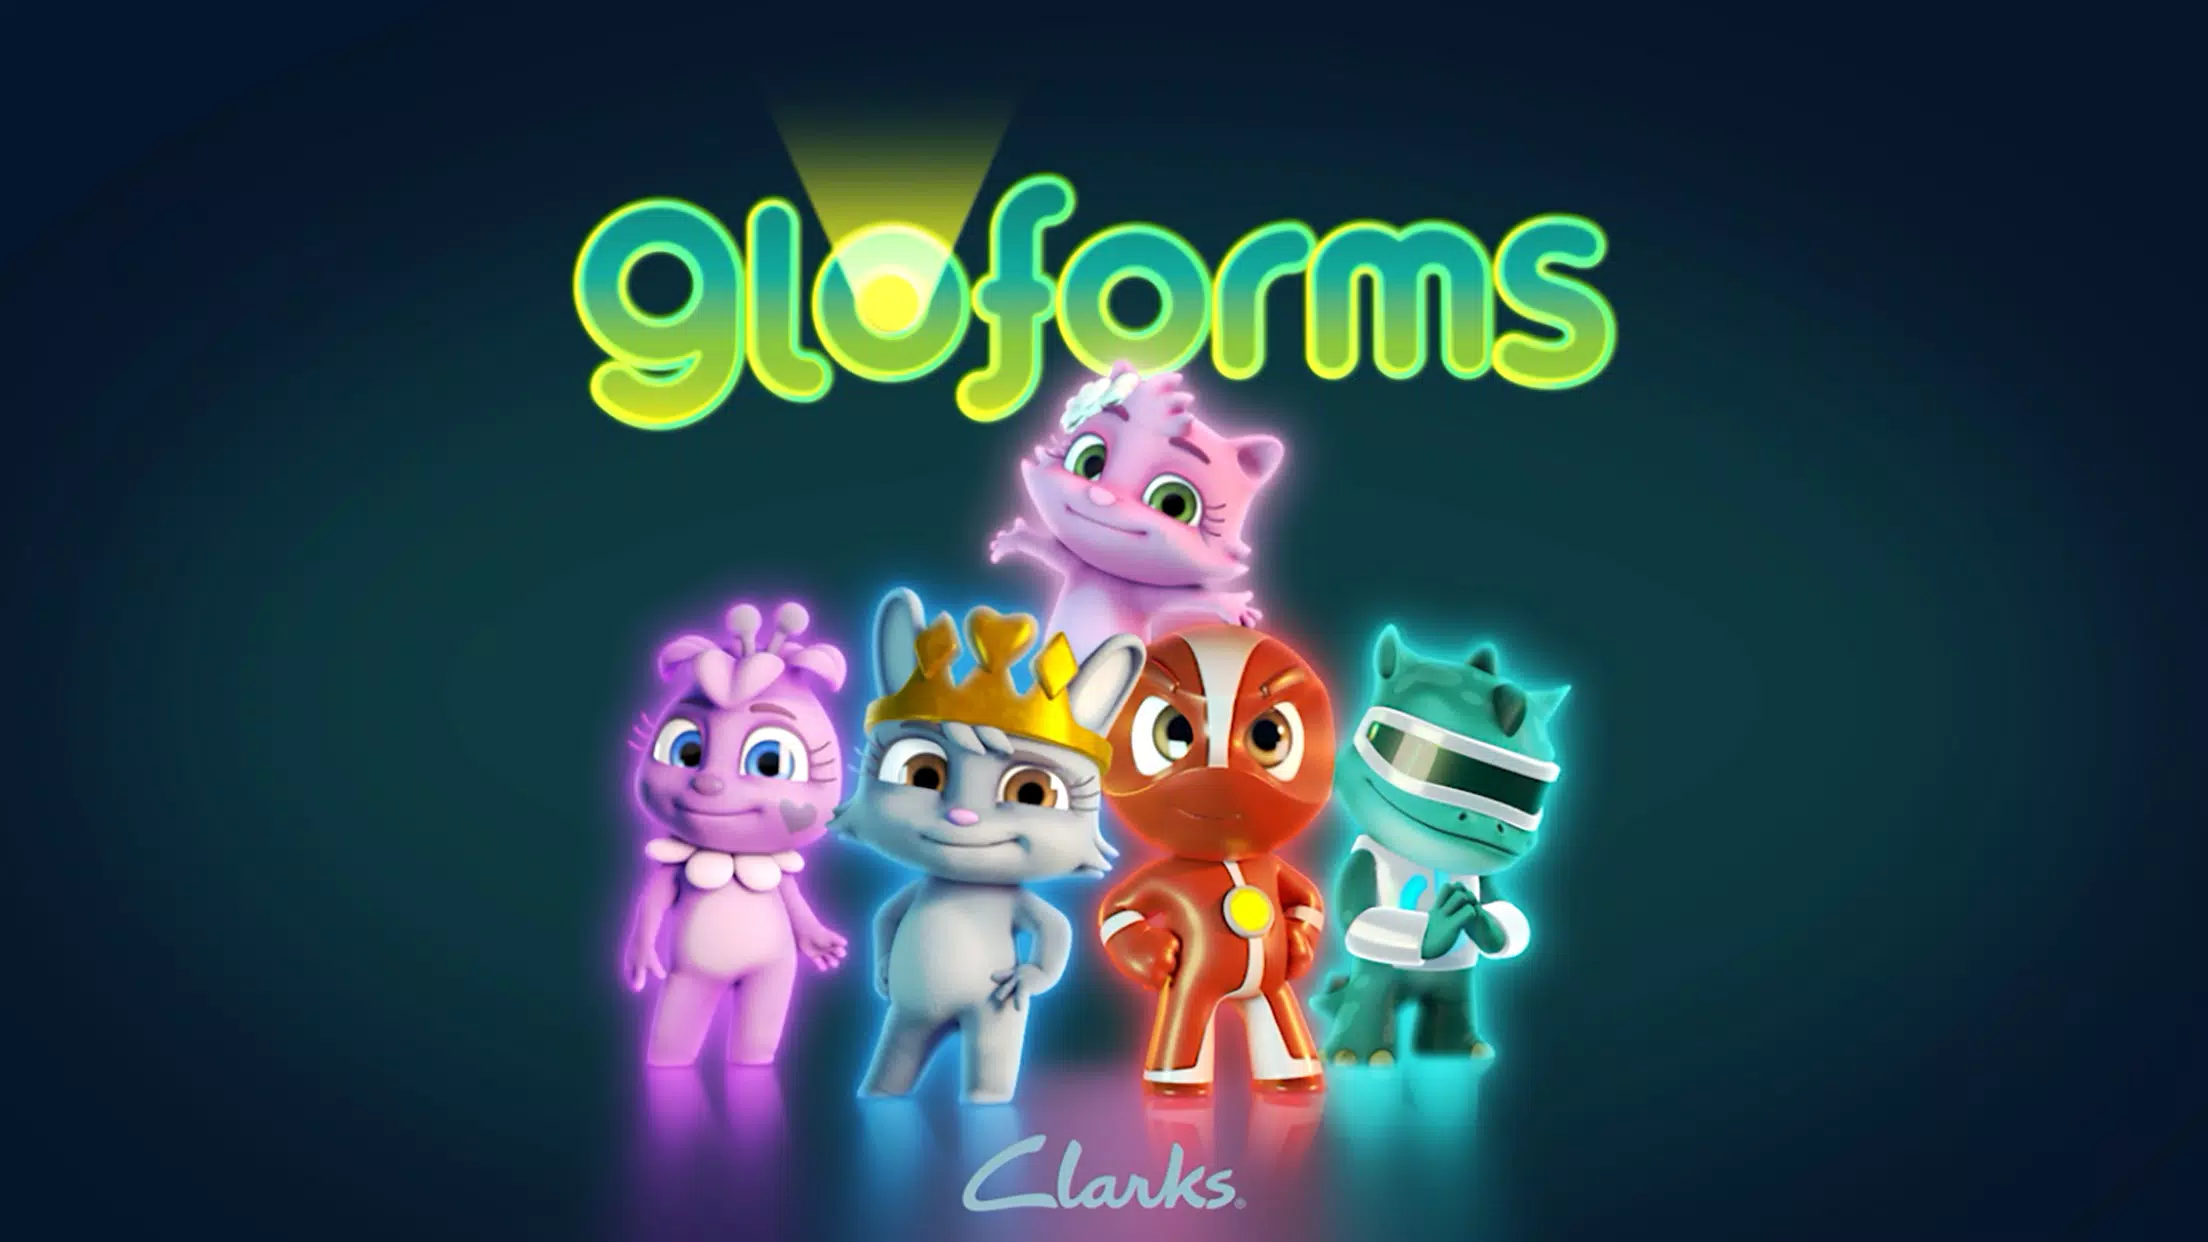 Clarks Gloforms for Android - APK Download